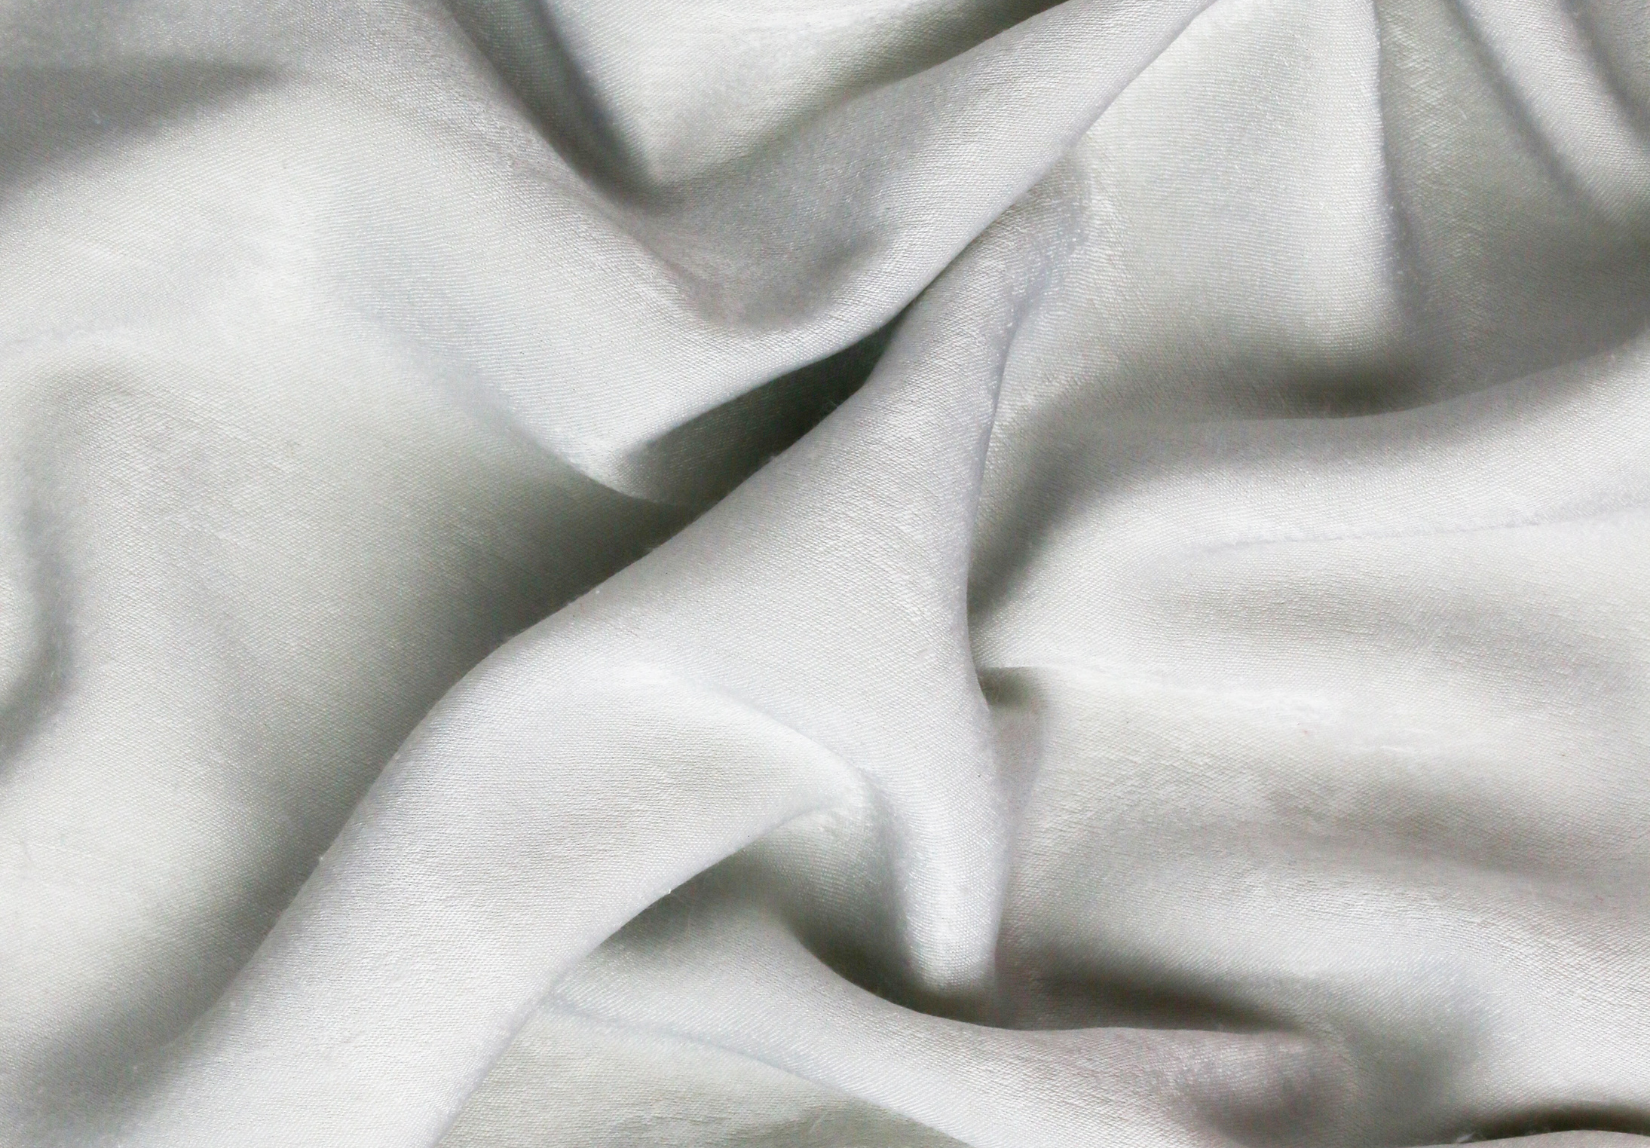 Rumpled white sheets